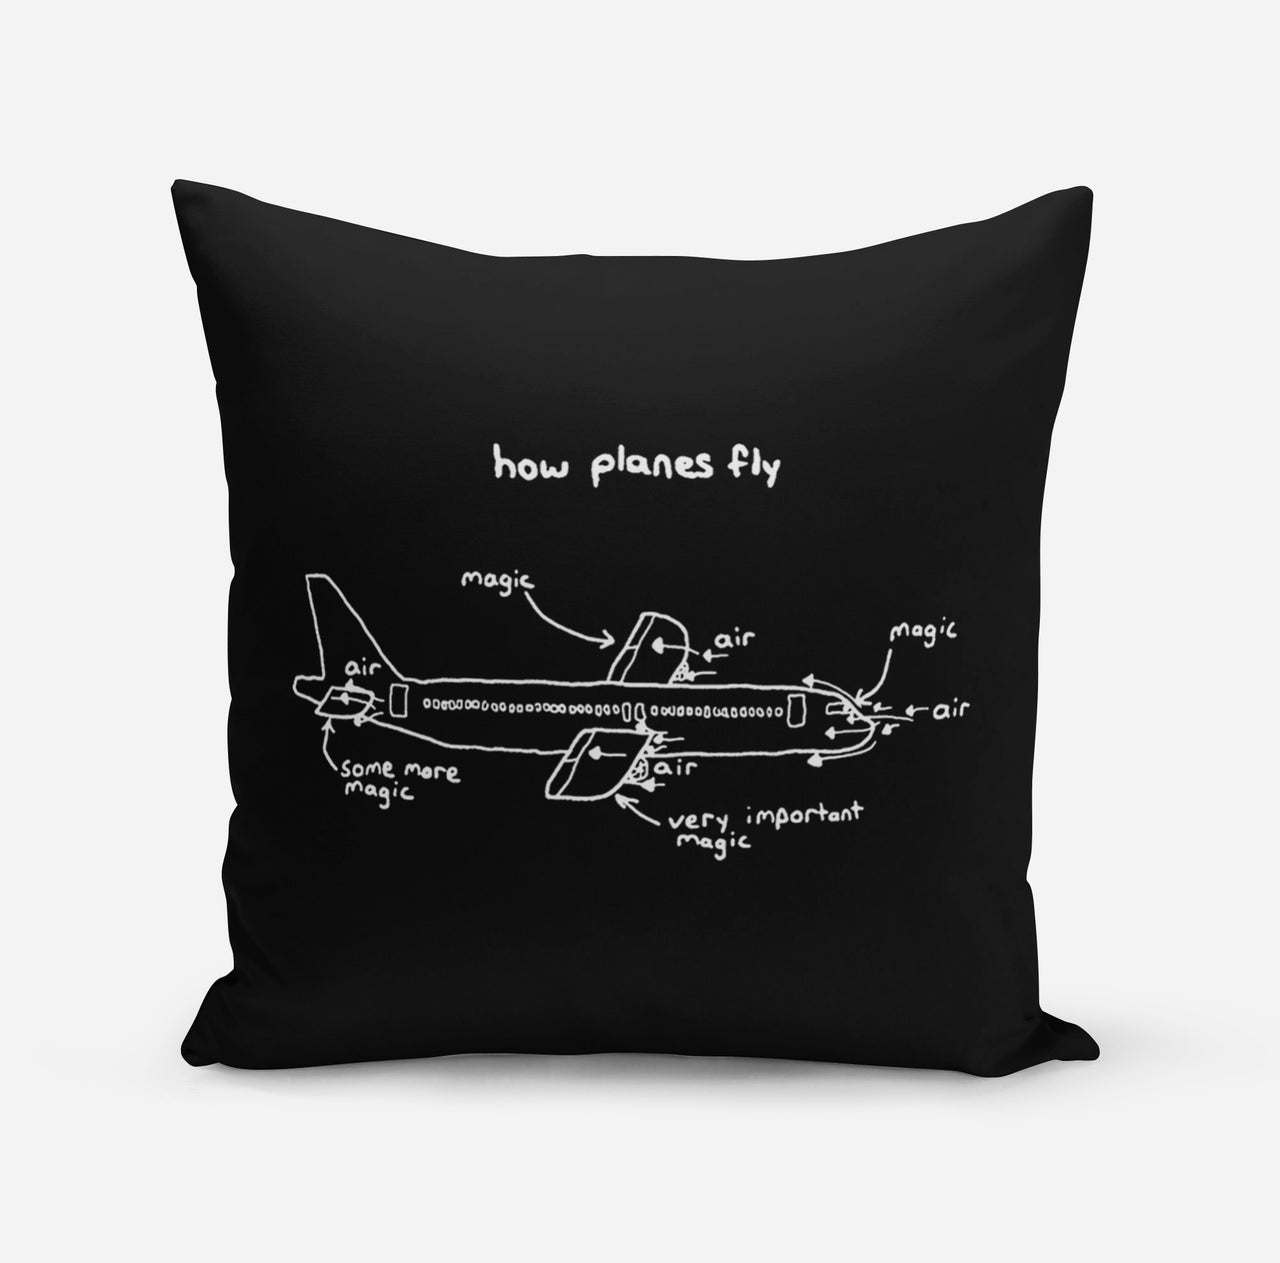 How Planes Fly Designed Pillows